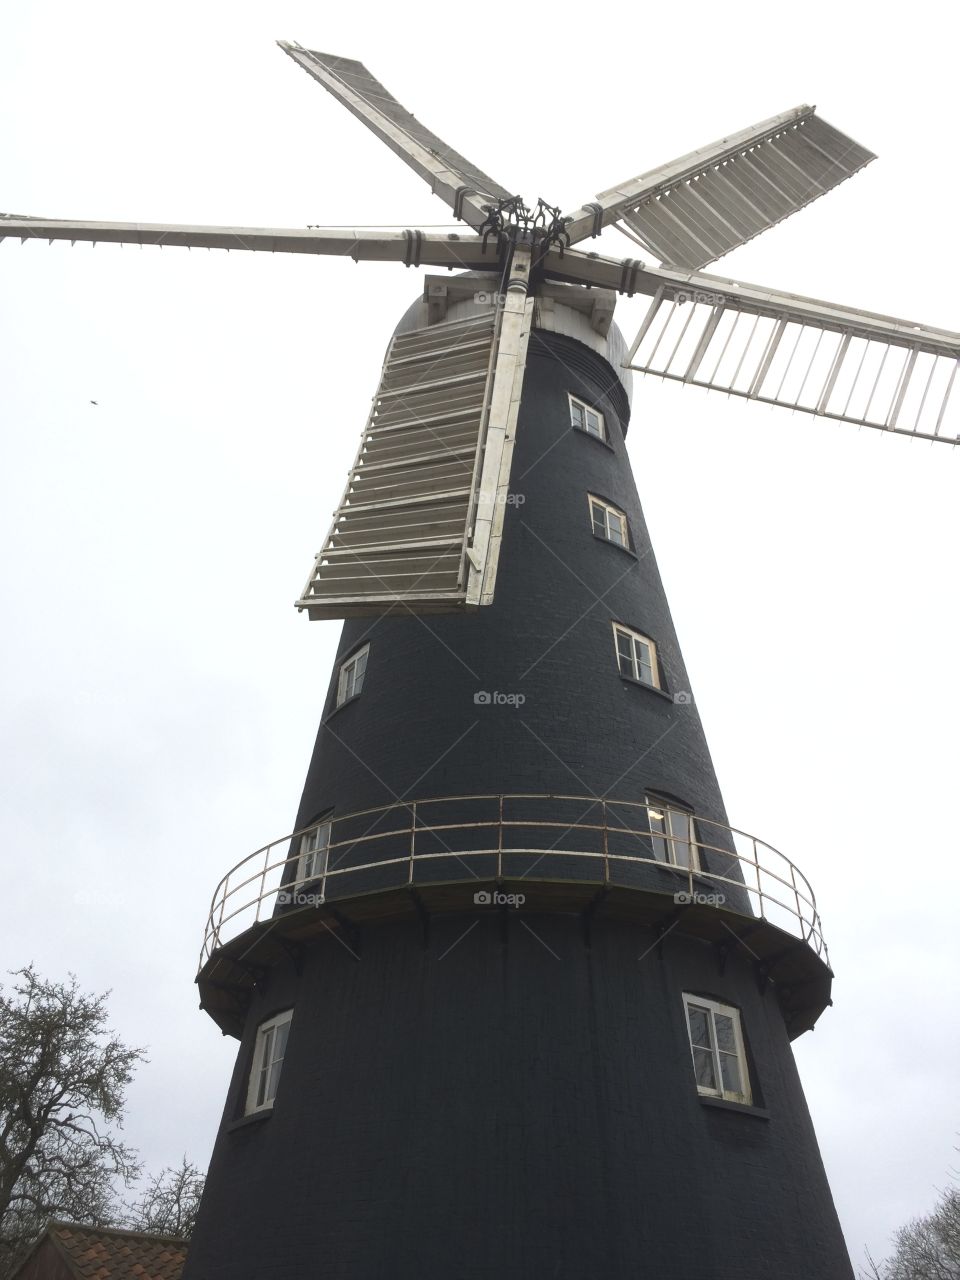 English Windmill. A working windmill in Lincolnshire.